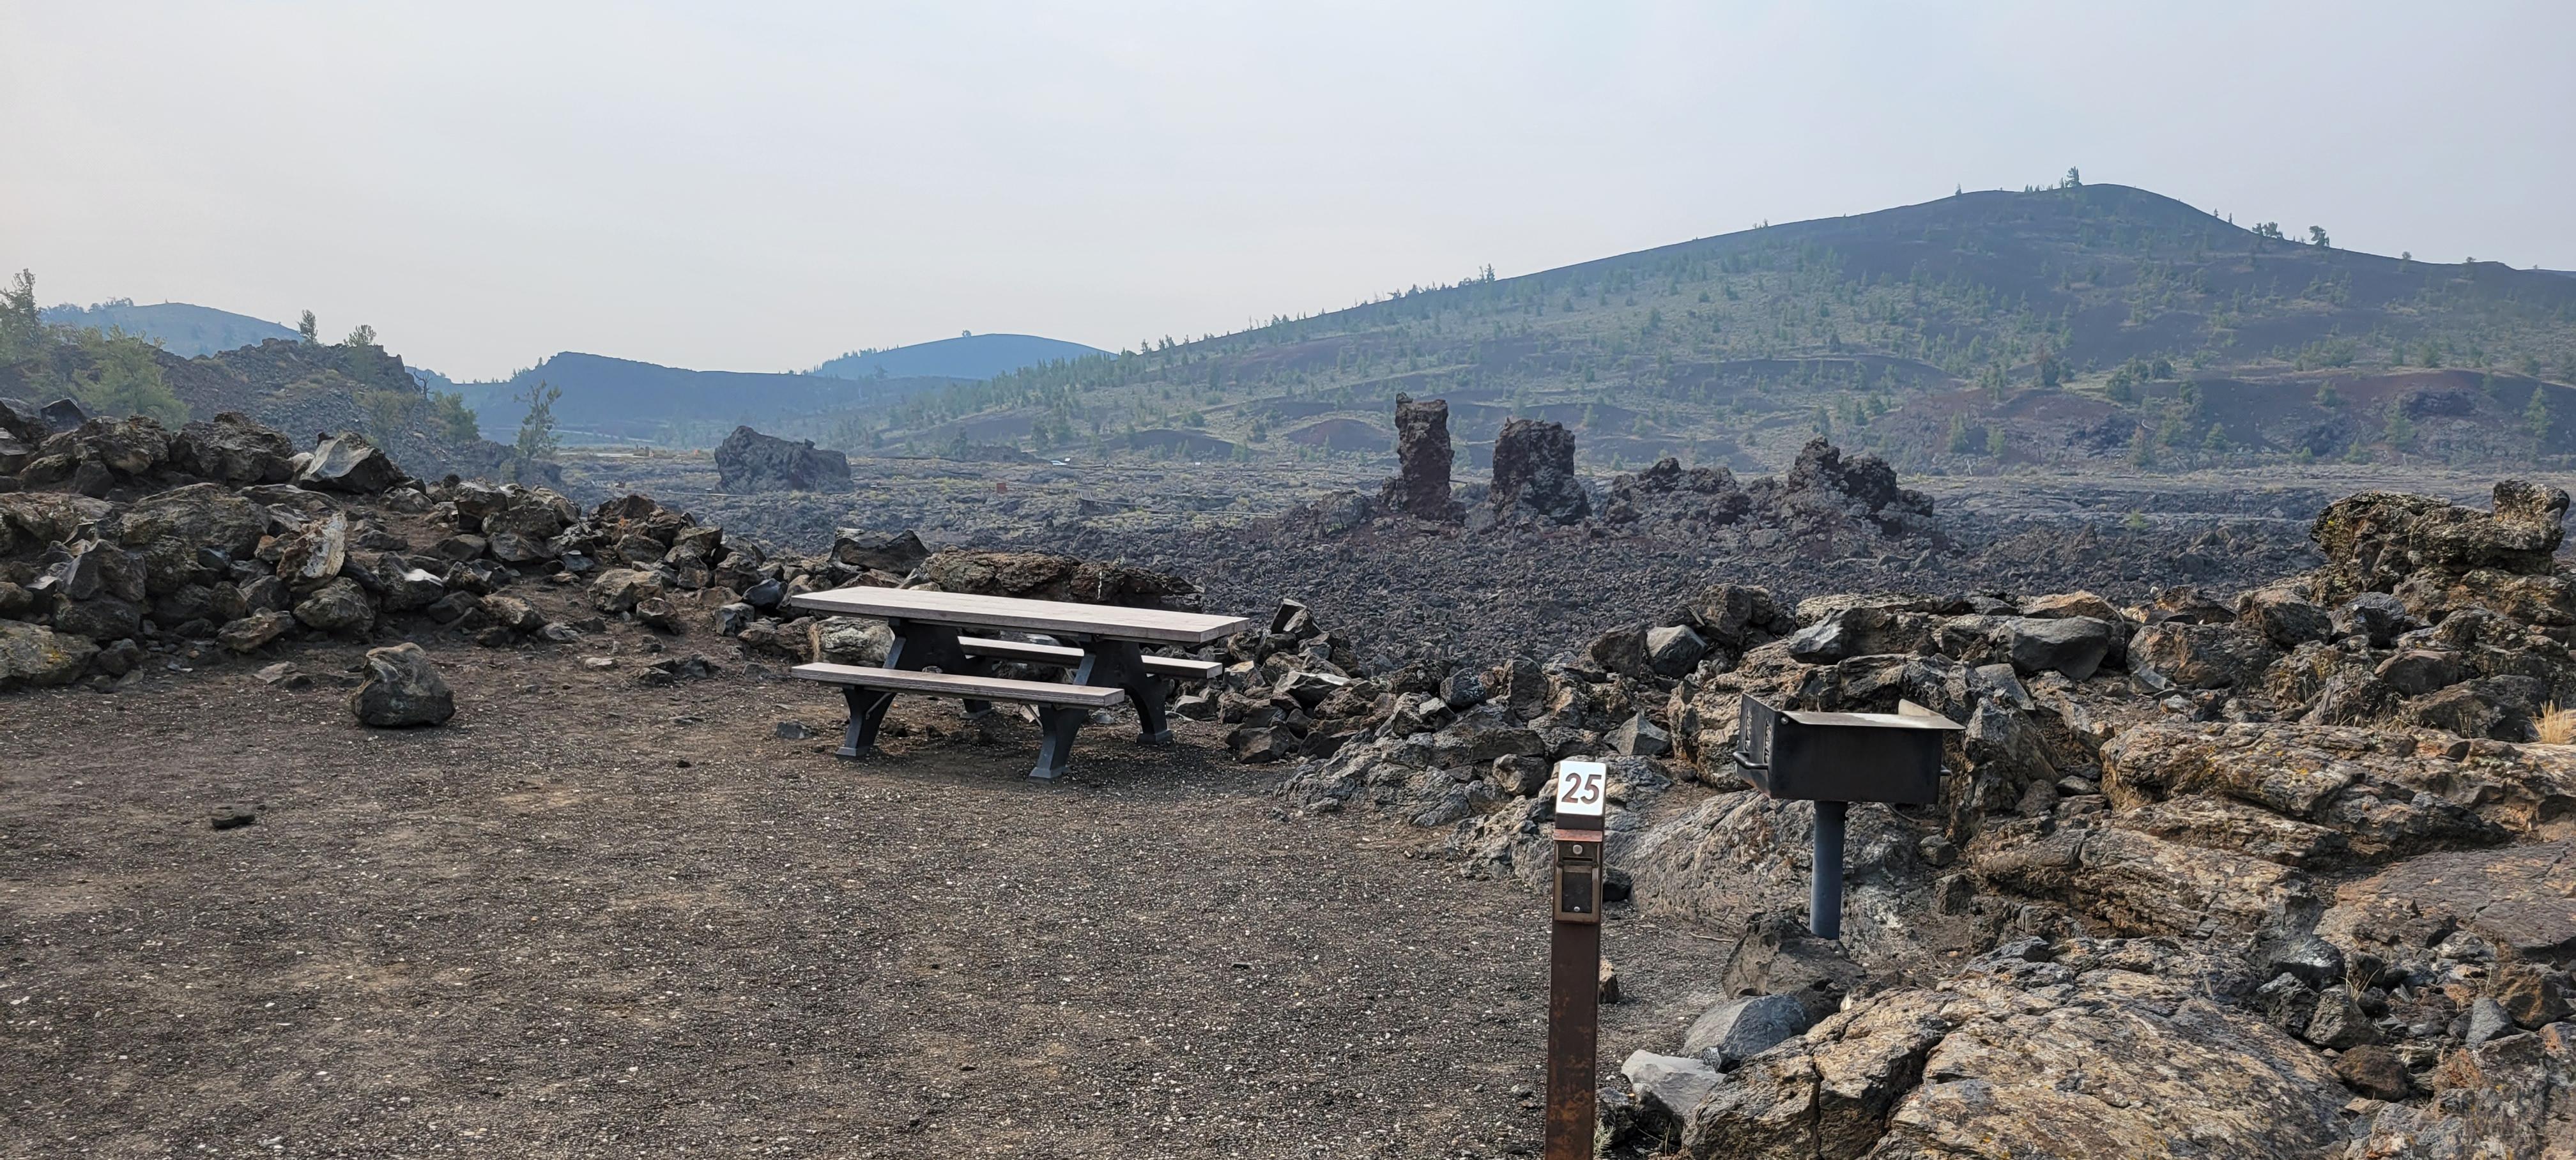 campsite with picnic table and grill against a dark rocky landscape and cinder cones